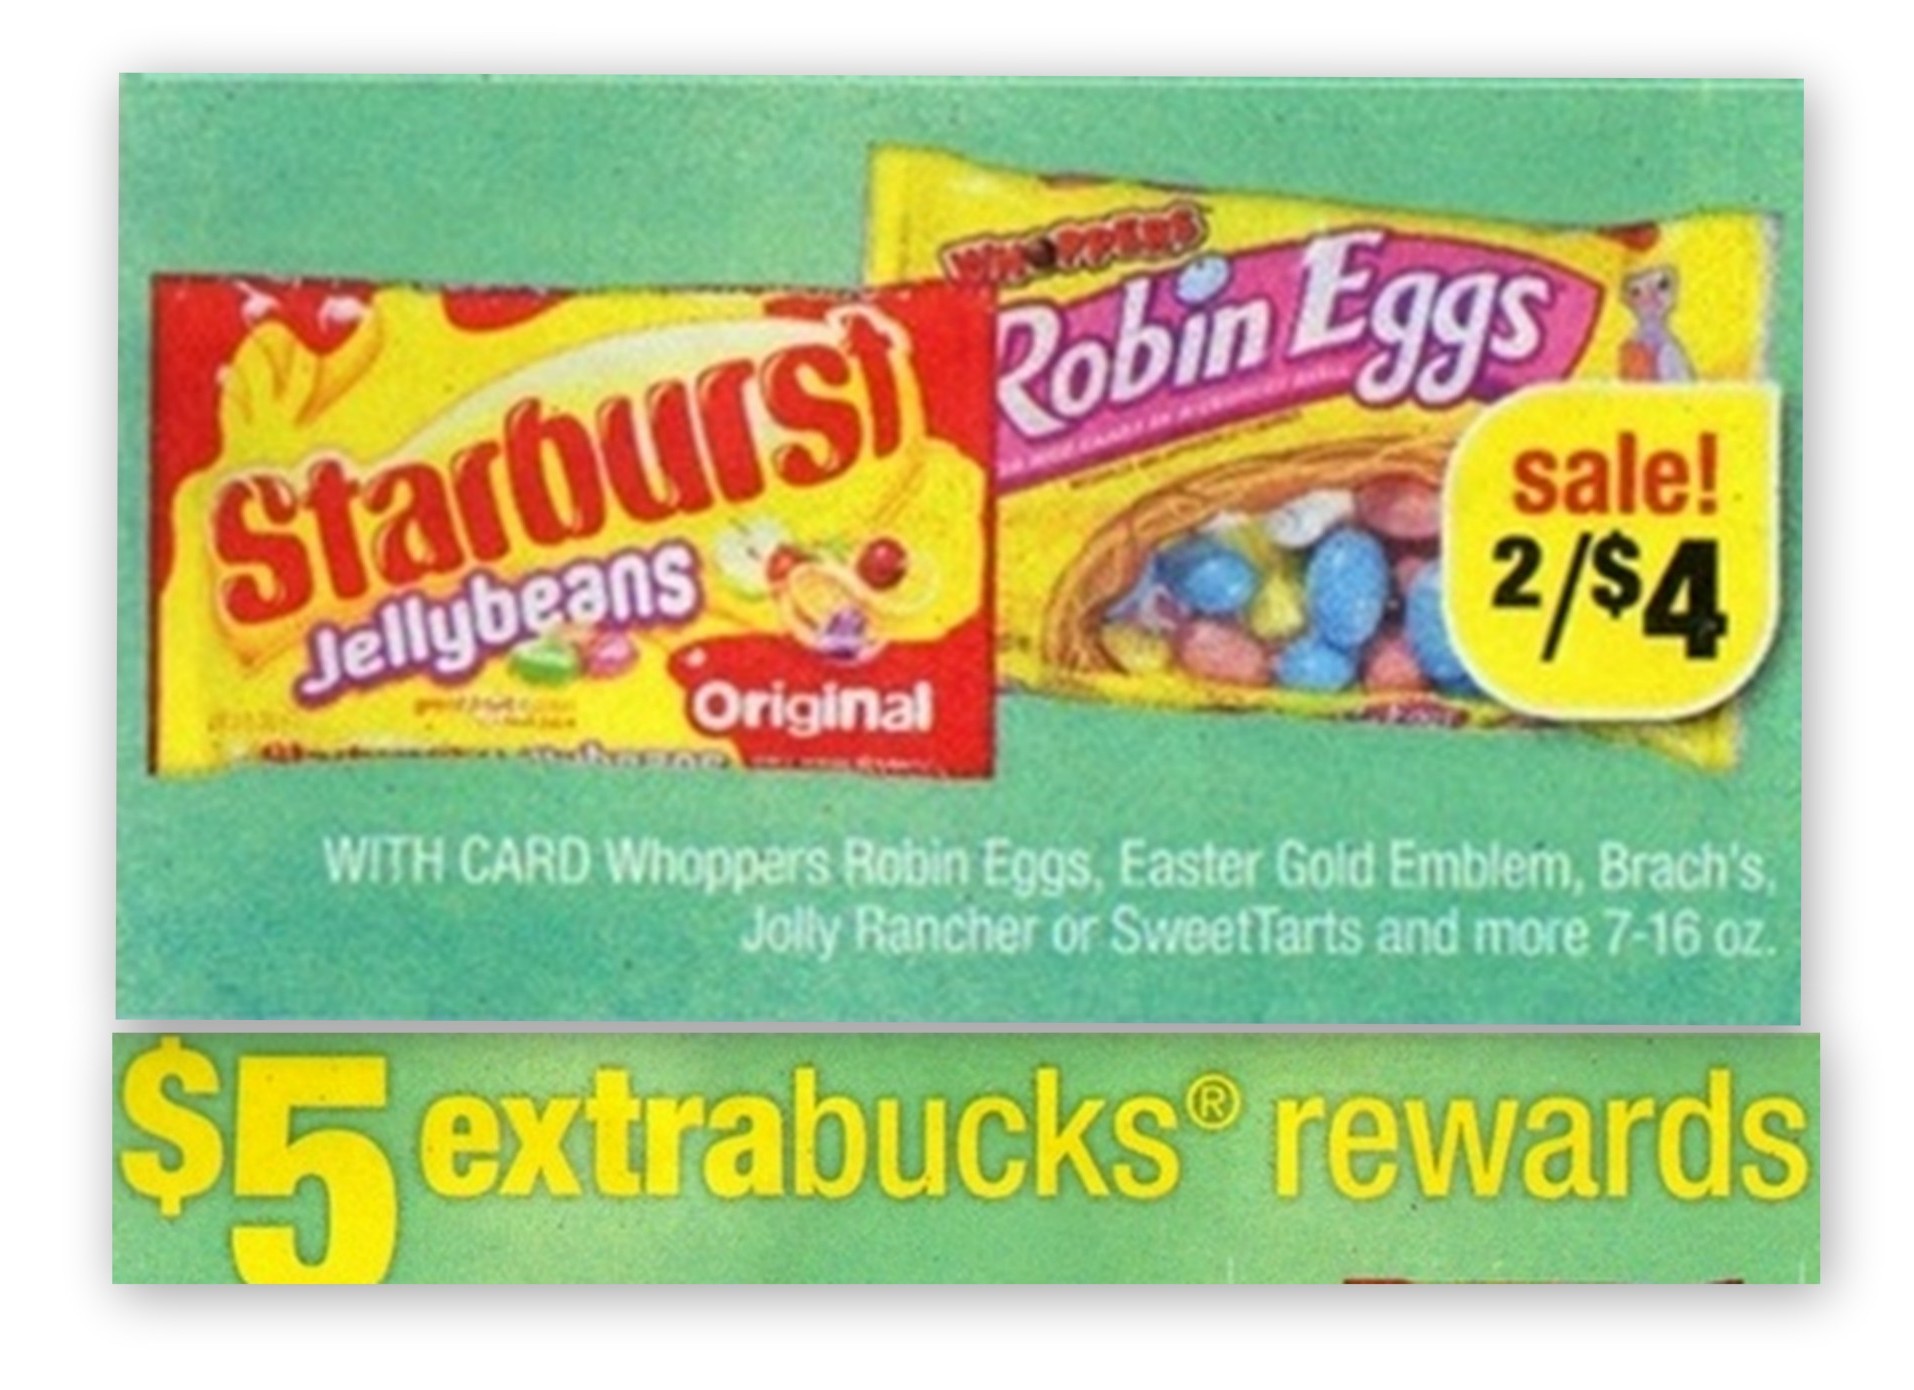 Whoppers Robin Eggs Deal at CVS ($0.50 or lower) Starting 3/17